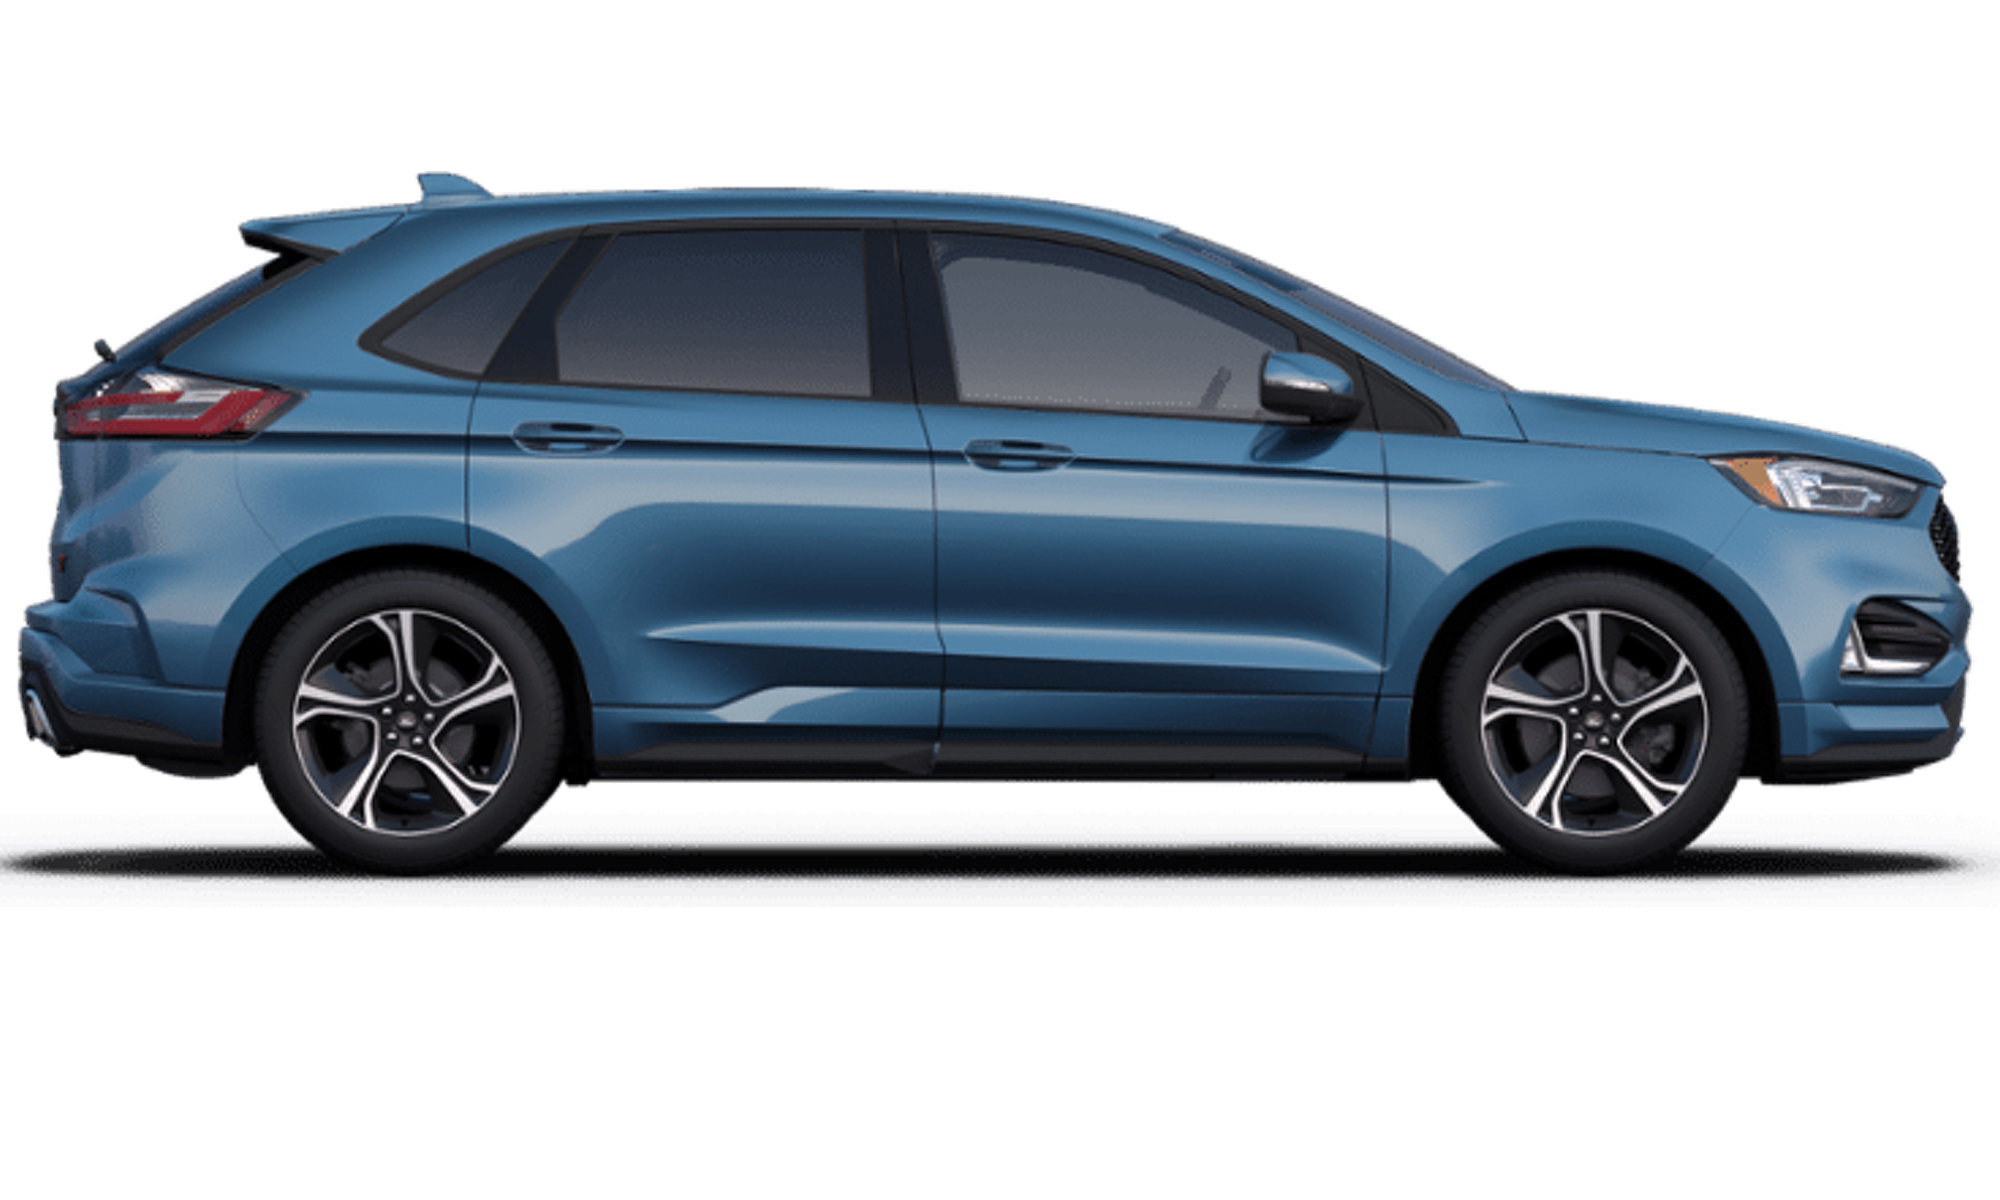 New Ford Performance Blue Color For 2019 Ford Edge First Look